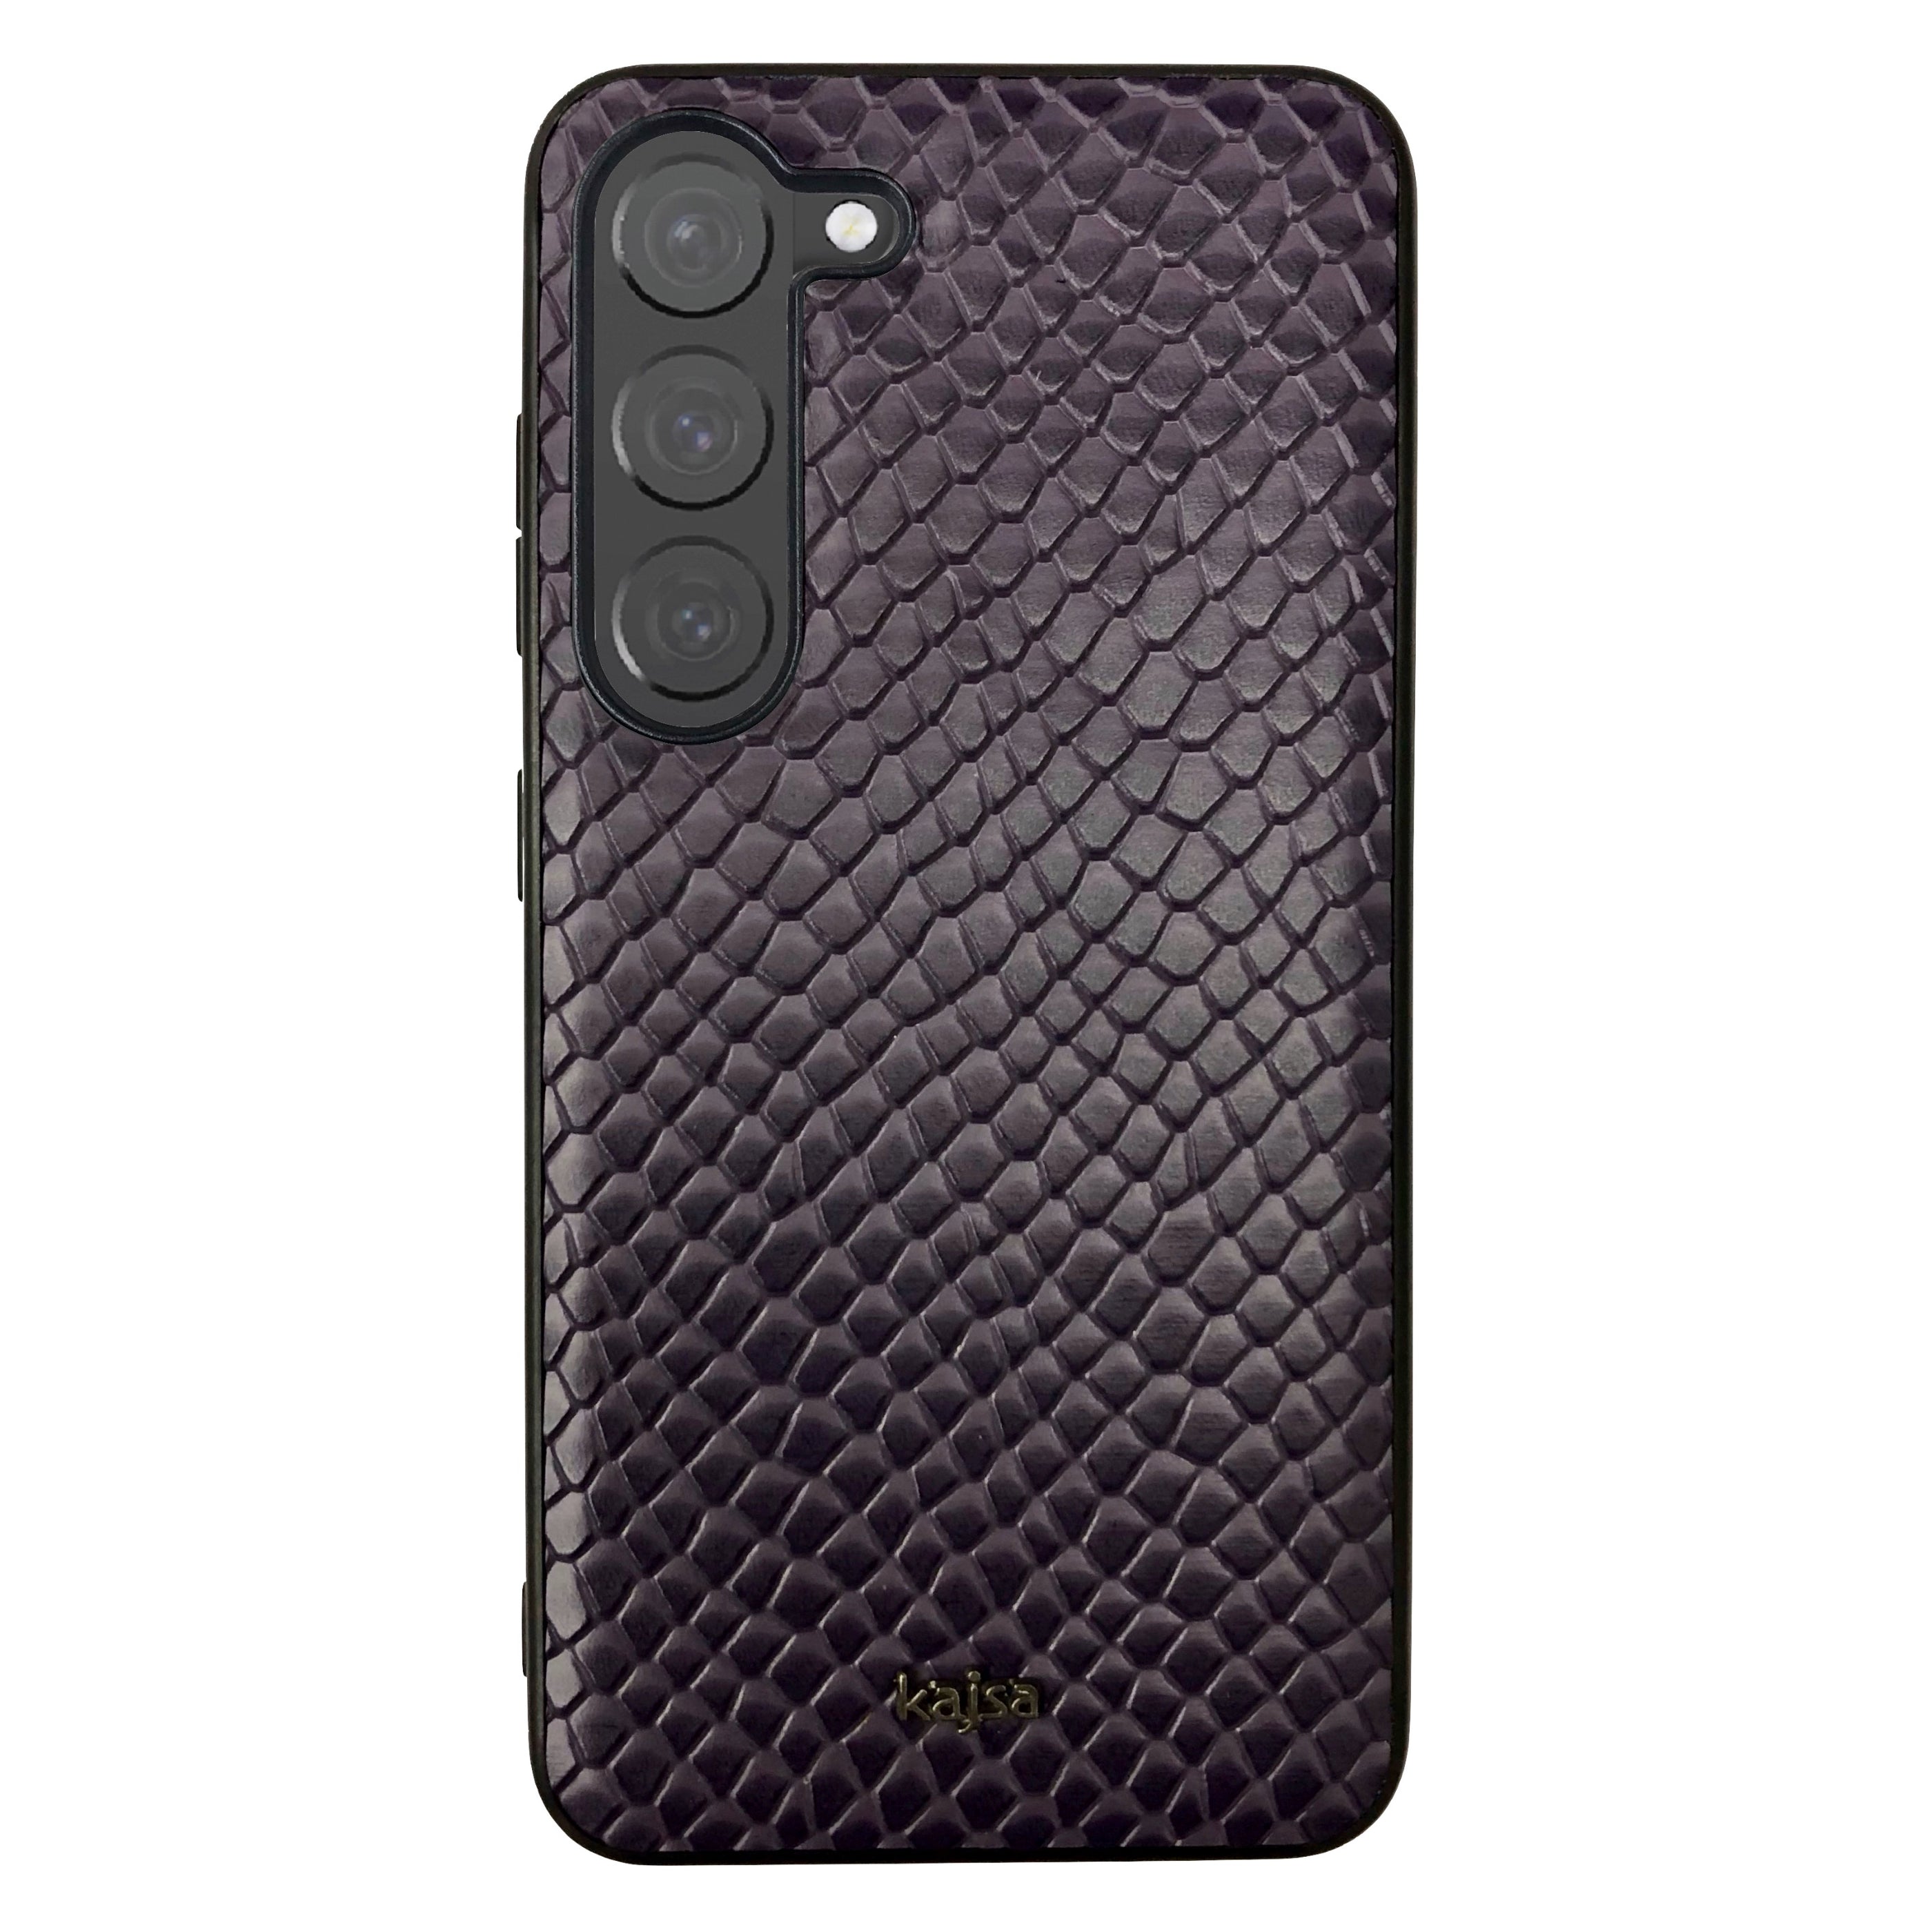 Genuine Leather Pearl Pattern Back Case for Samsung Galaxy S23/S23+/S23 Ultra-Phone Case- phone case - phone cases- phone cover- iphone cover- iphone case- iphone cases- leather case- leather cases- DIYCASE - custom case - leather cover - hand strap case - croco pattern case - snake pattern case - carbon fiber phone case - phone case brand - unique phone case - high quality - phone case brand - protective case - buy phone case hong kong - online buy phone case - iphone‎手機殼 - 客製化手機殼 - samsung ‎手機殼 - 香港手機殼 - 